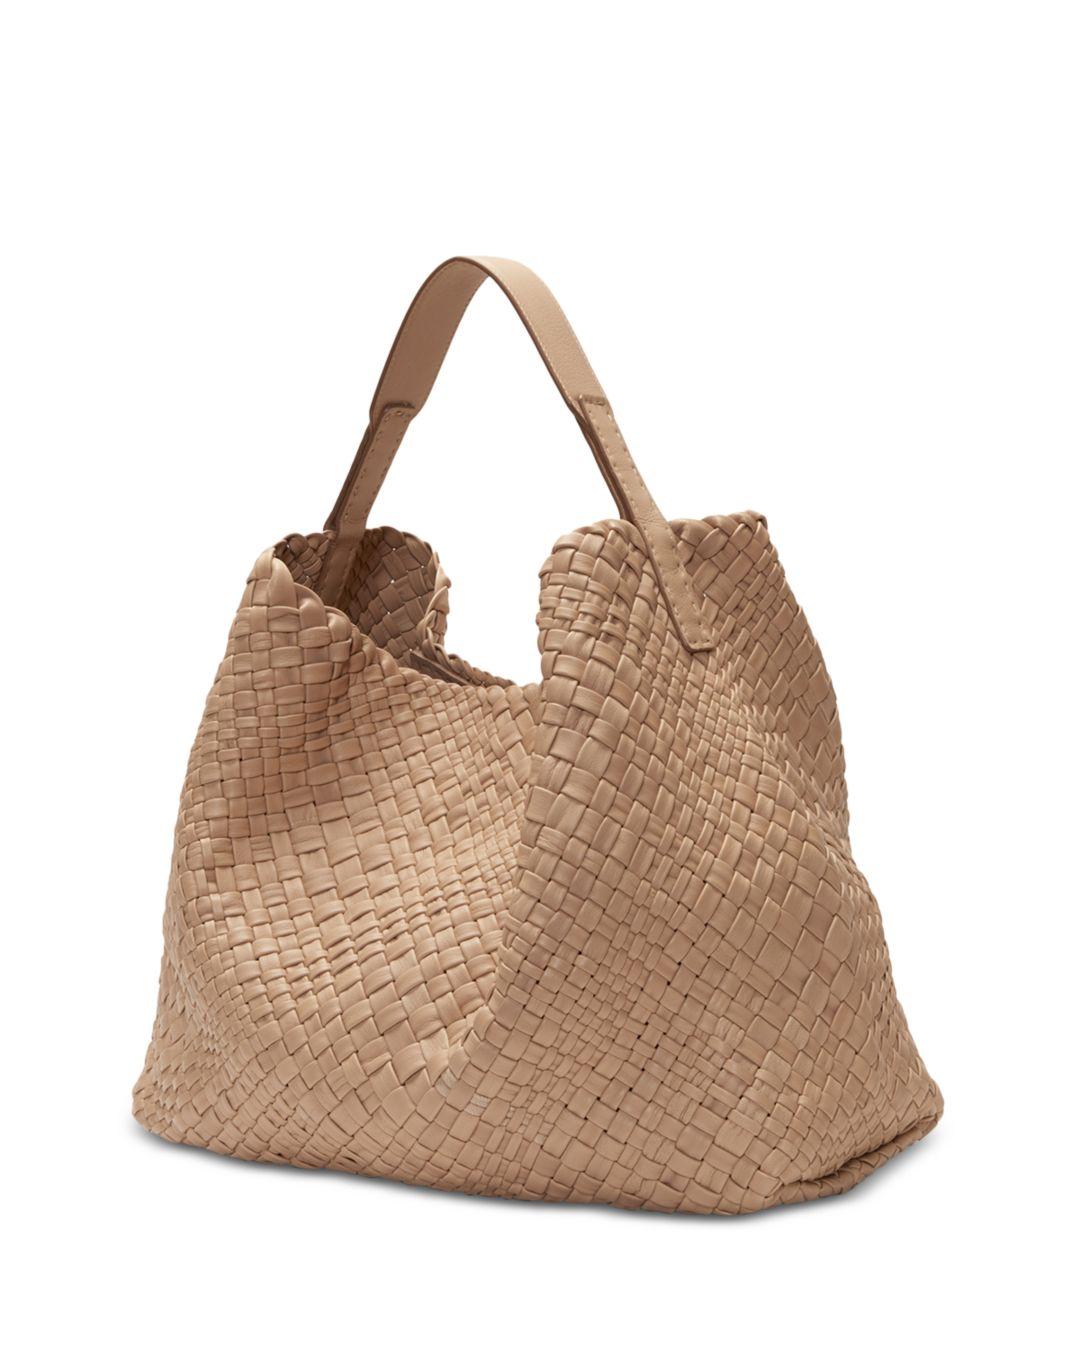 Etienne Aigner Eitenne Aigner Irena Woven Leather Hobo | Lyst